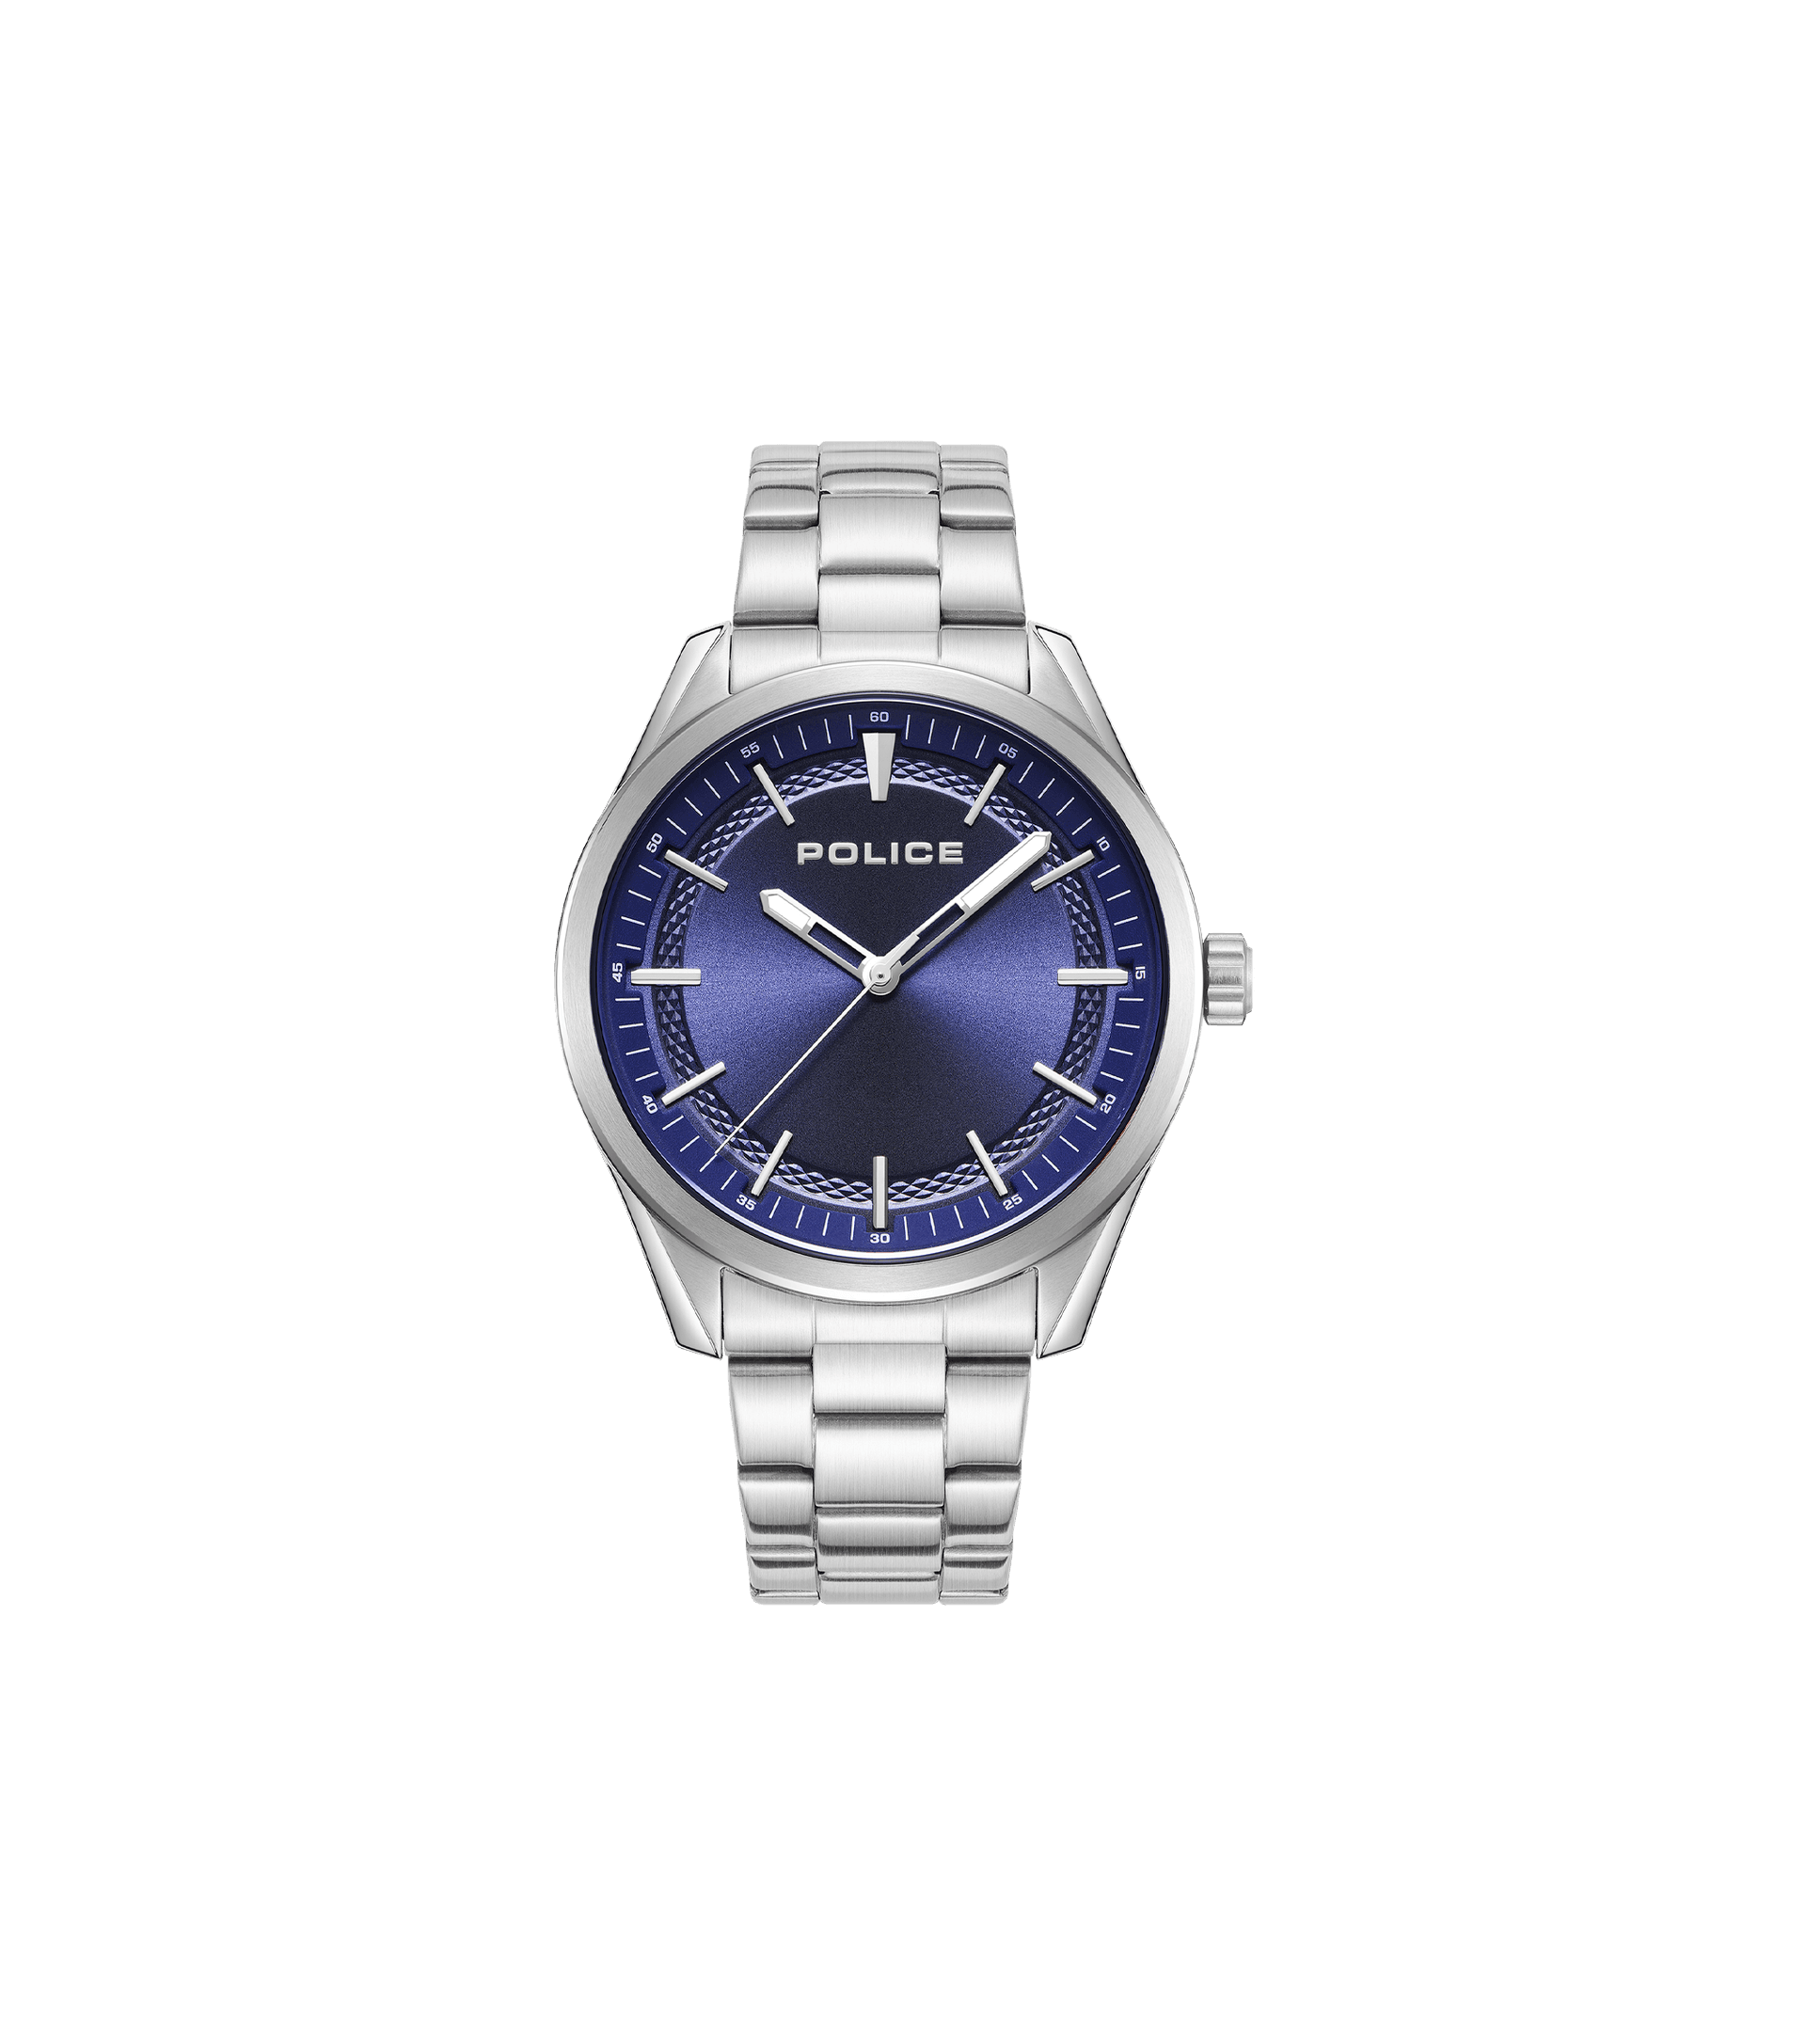 Police watches - Grille Watch By For Grey Police Men Grey